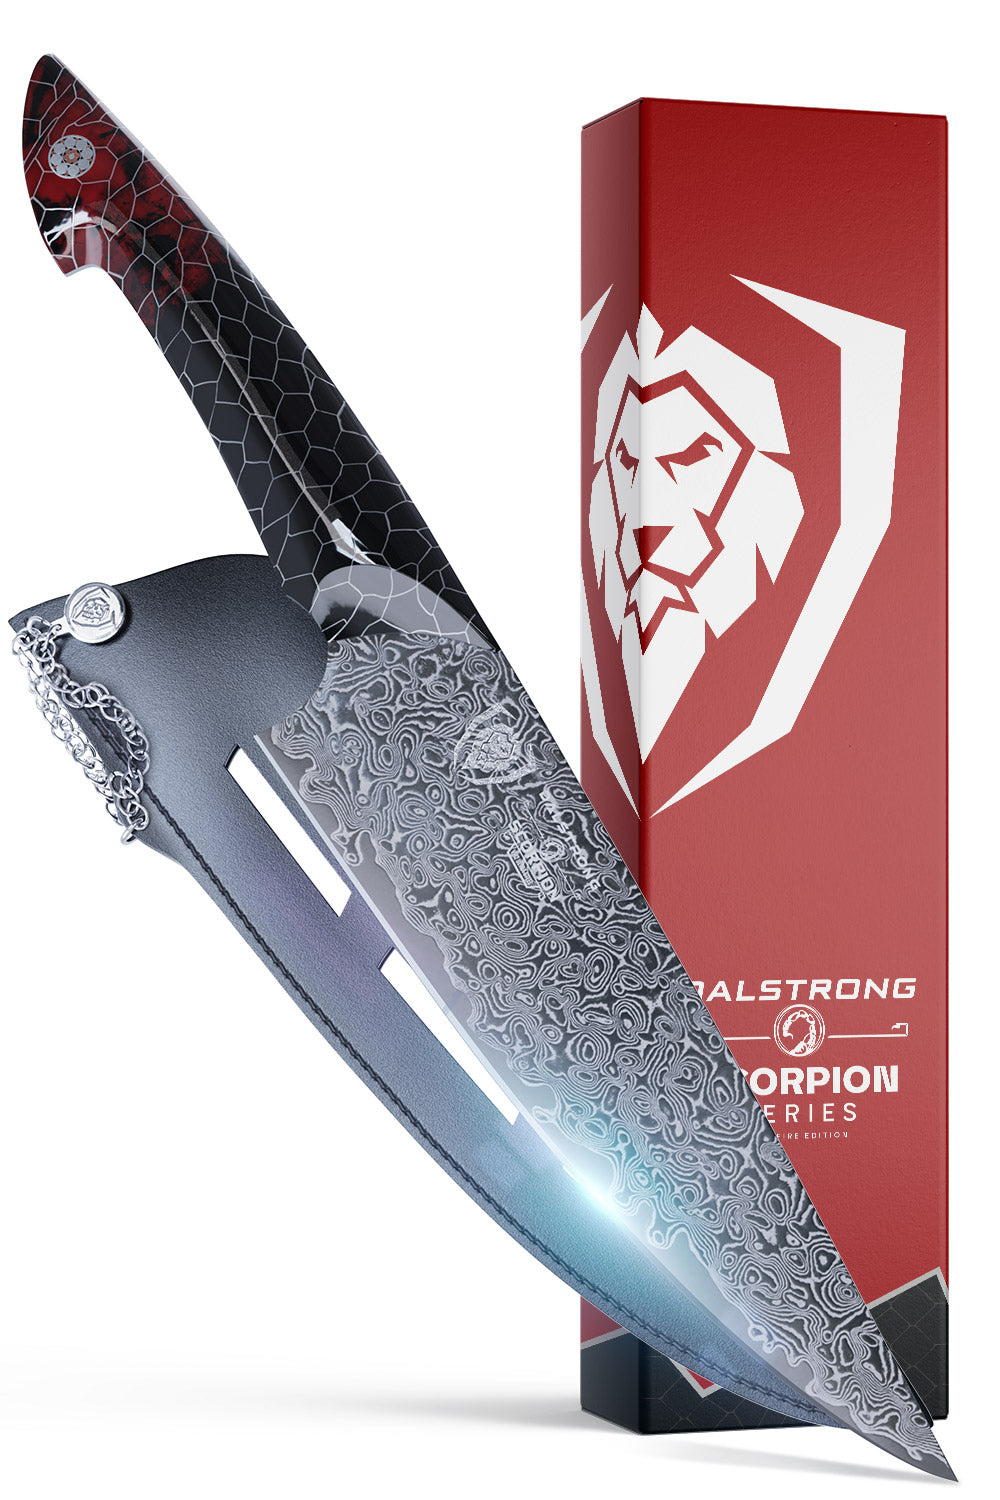 Dalstrong scorpion series 9.5 inch chef knife in front of it's premium packaging.